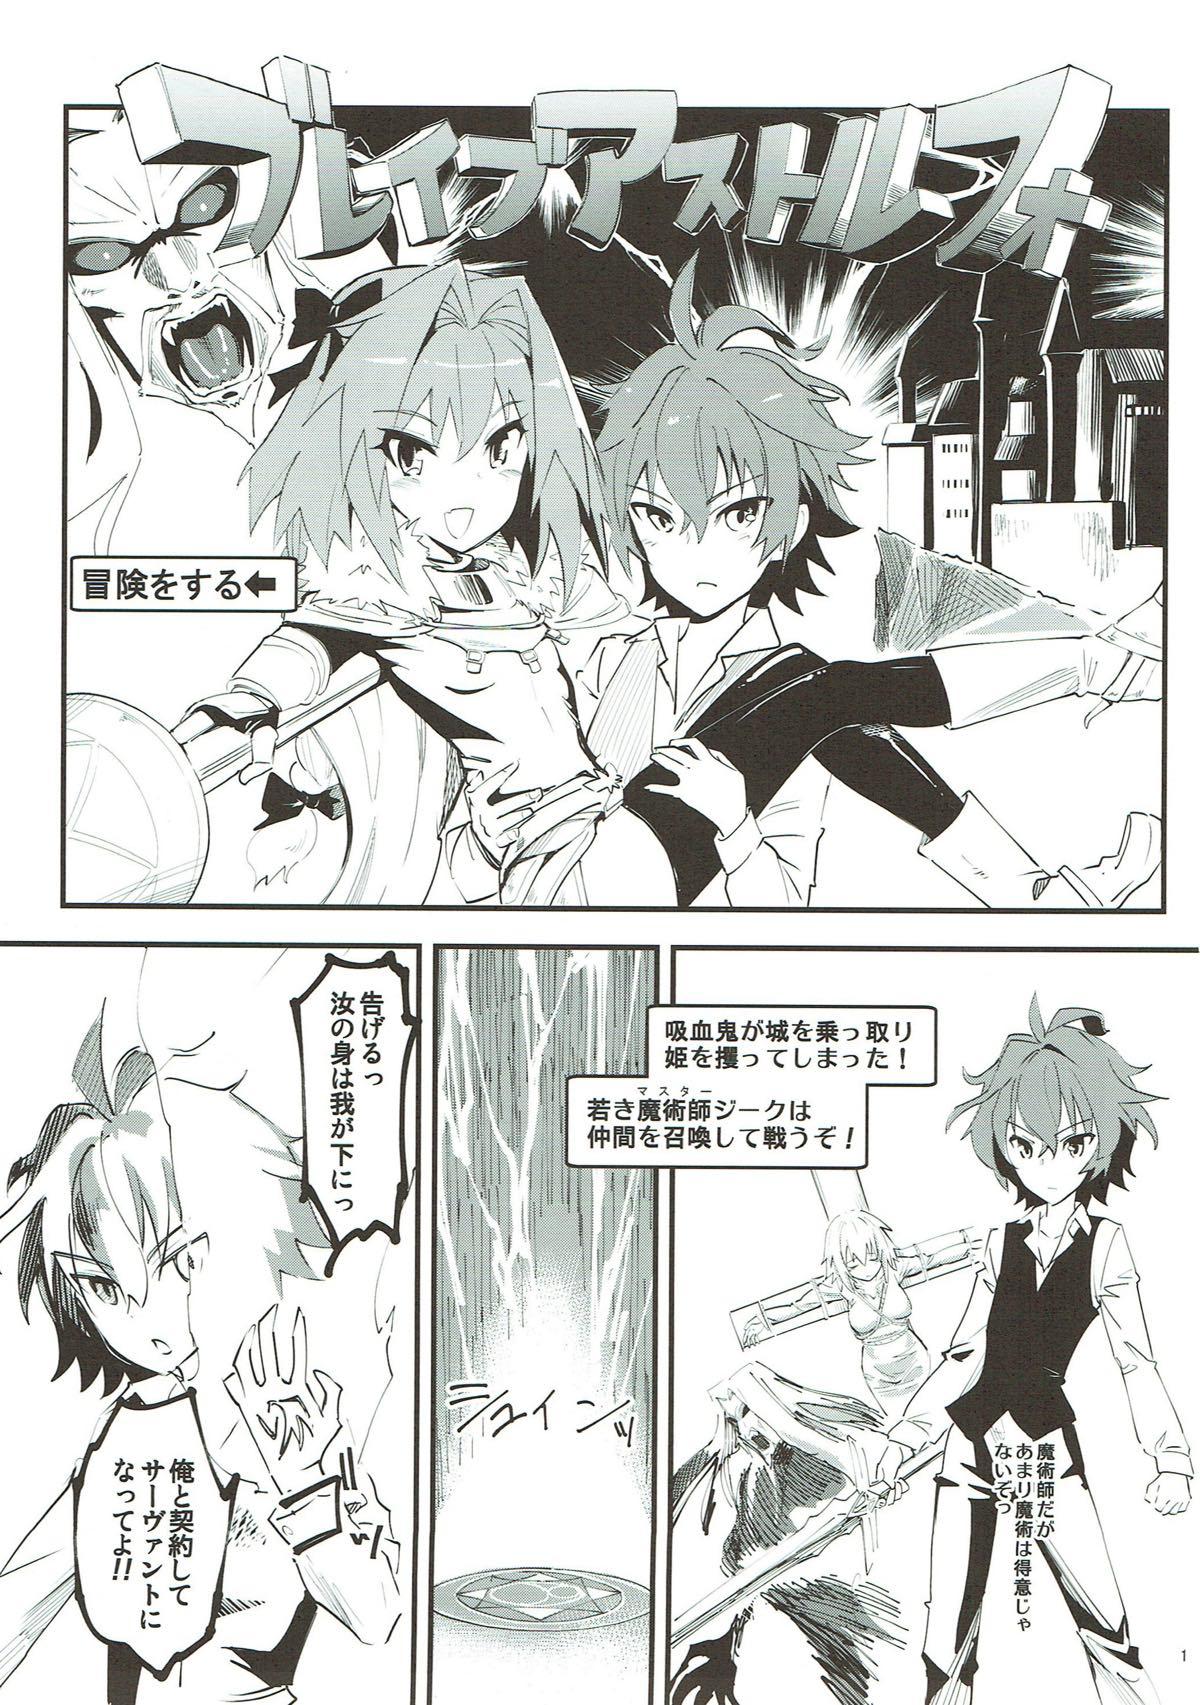 Verga CLASS CHANGE!! Brave Astolfo - Fate apocrypha Gets - Page 2